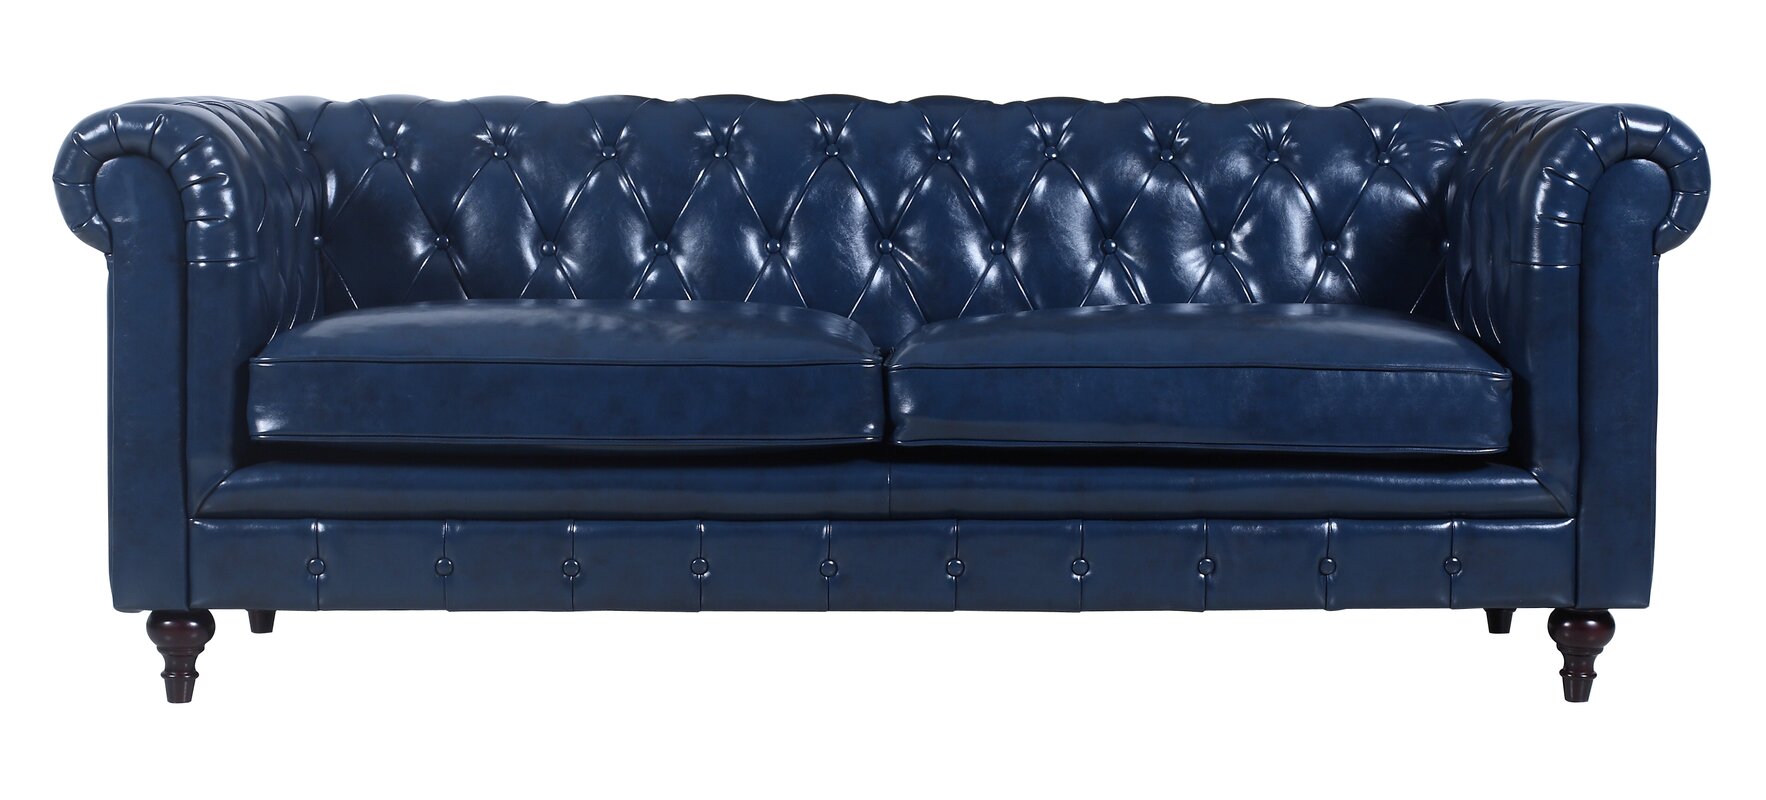 Blue Leather Chesterfield Sofa Royal Navy Blue Leather